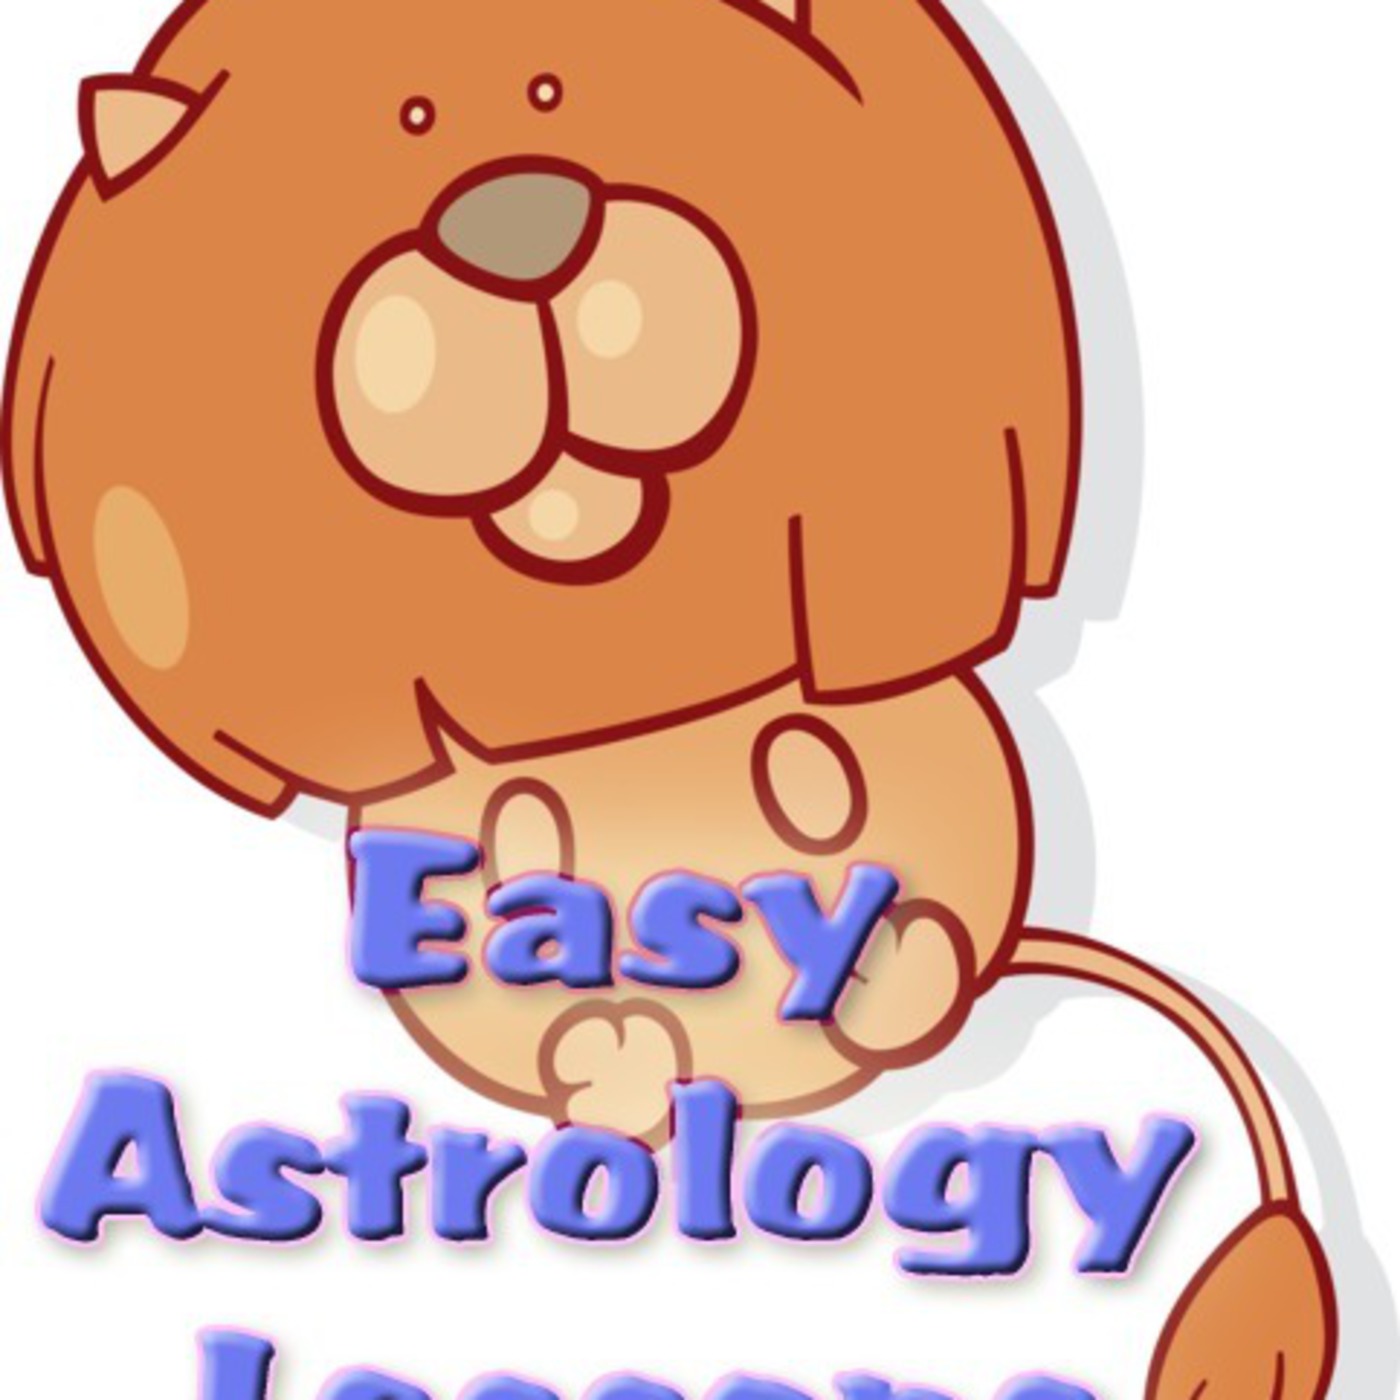 Earth energy 102: Easy Astrology Lessons episode 7